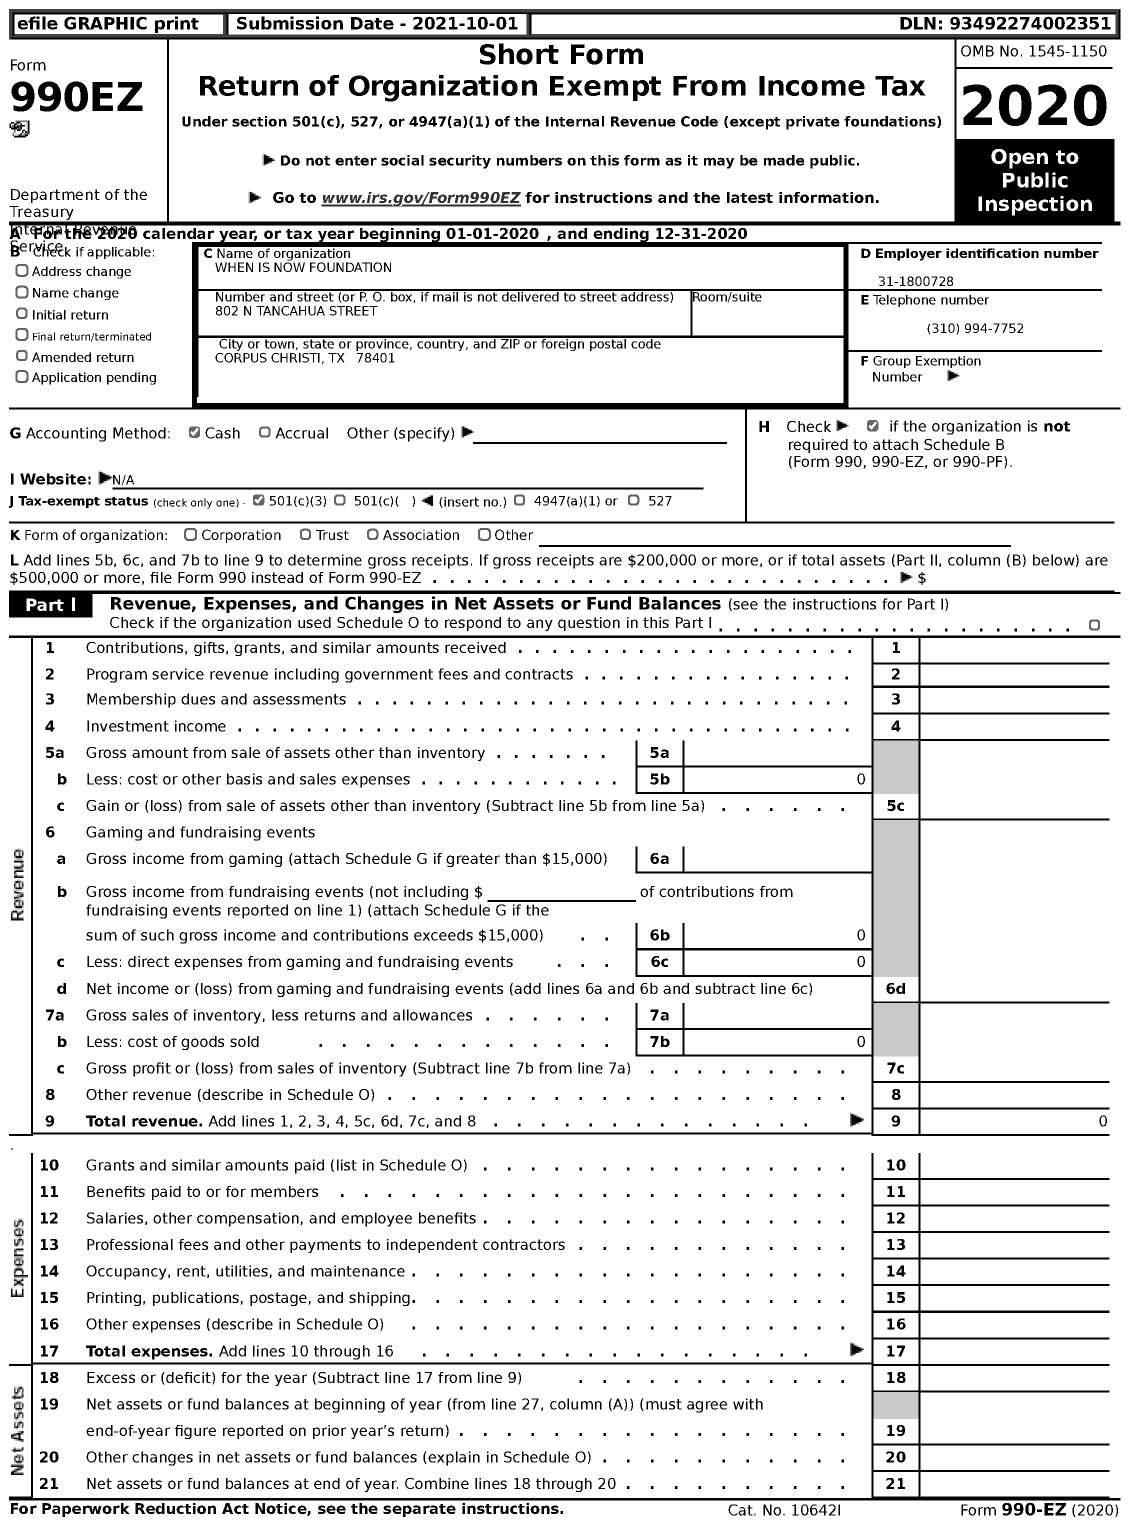 Image of first page of 2020 Form 990EZ for When Is Now Foundation